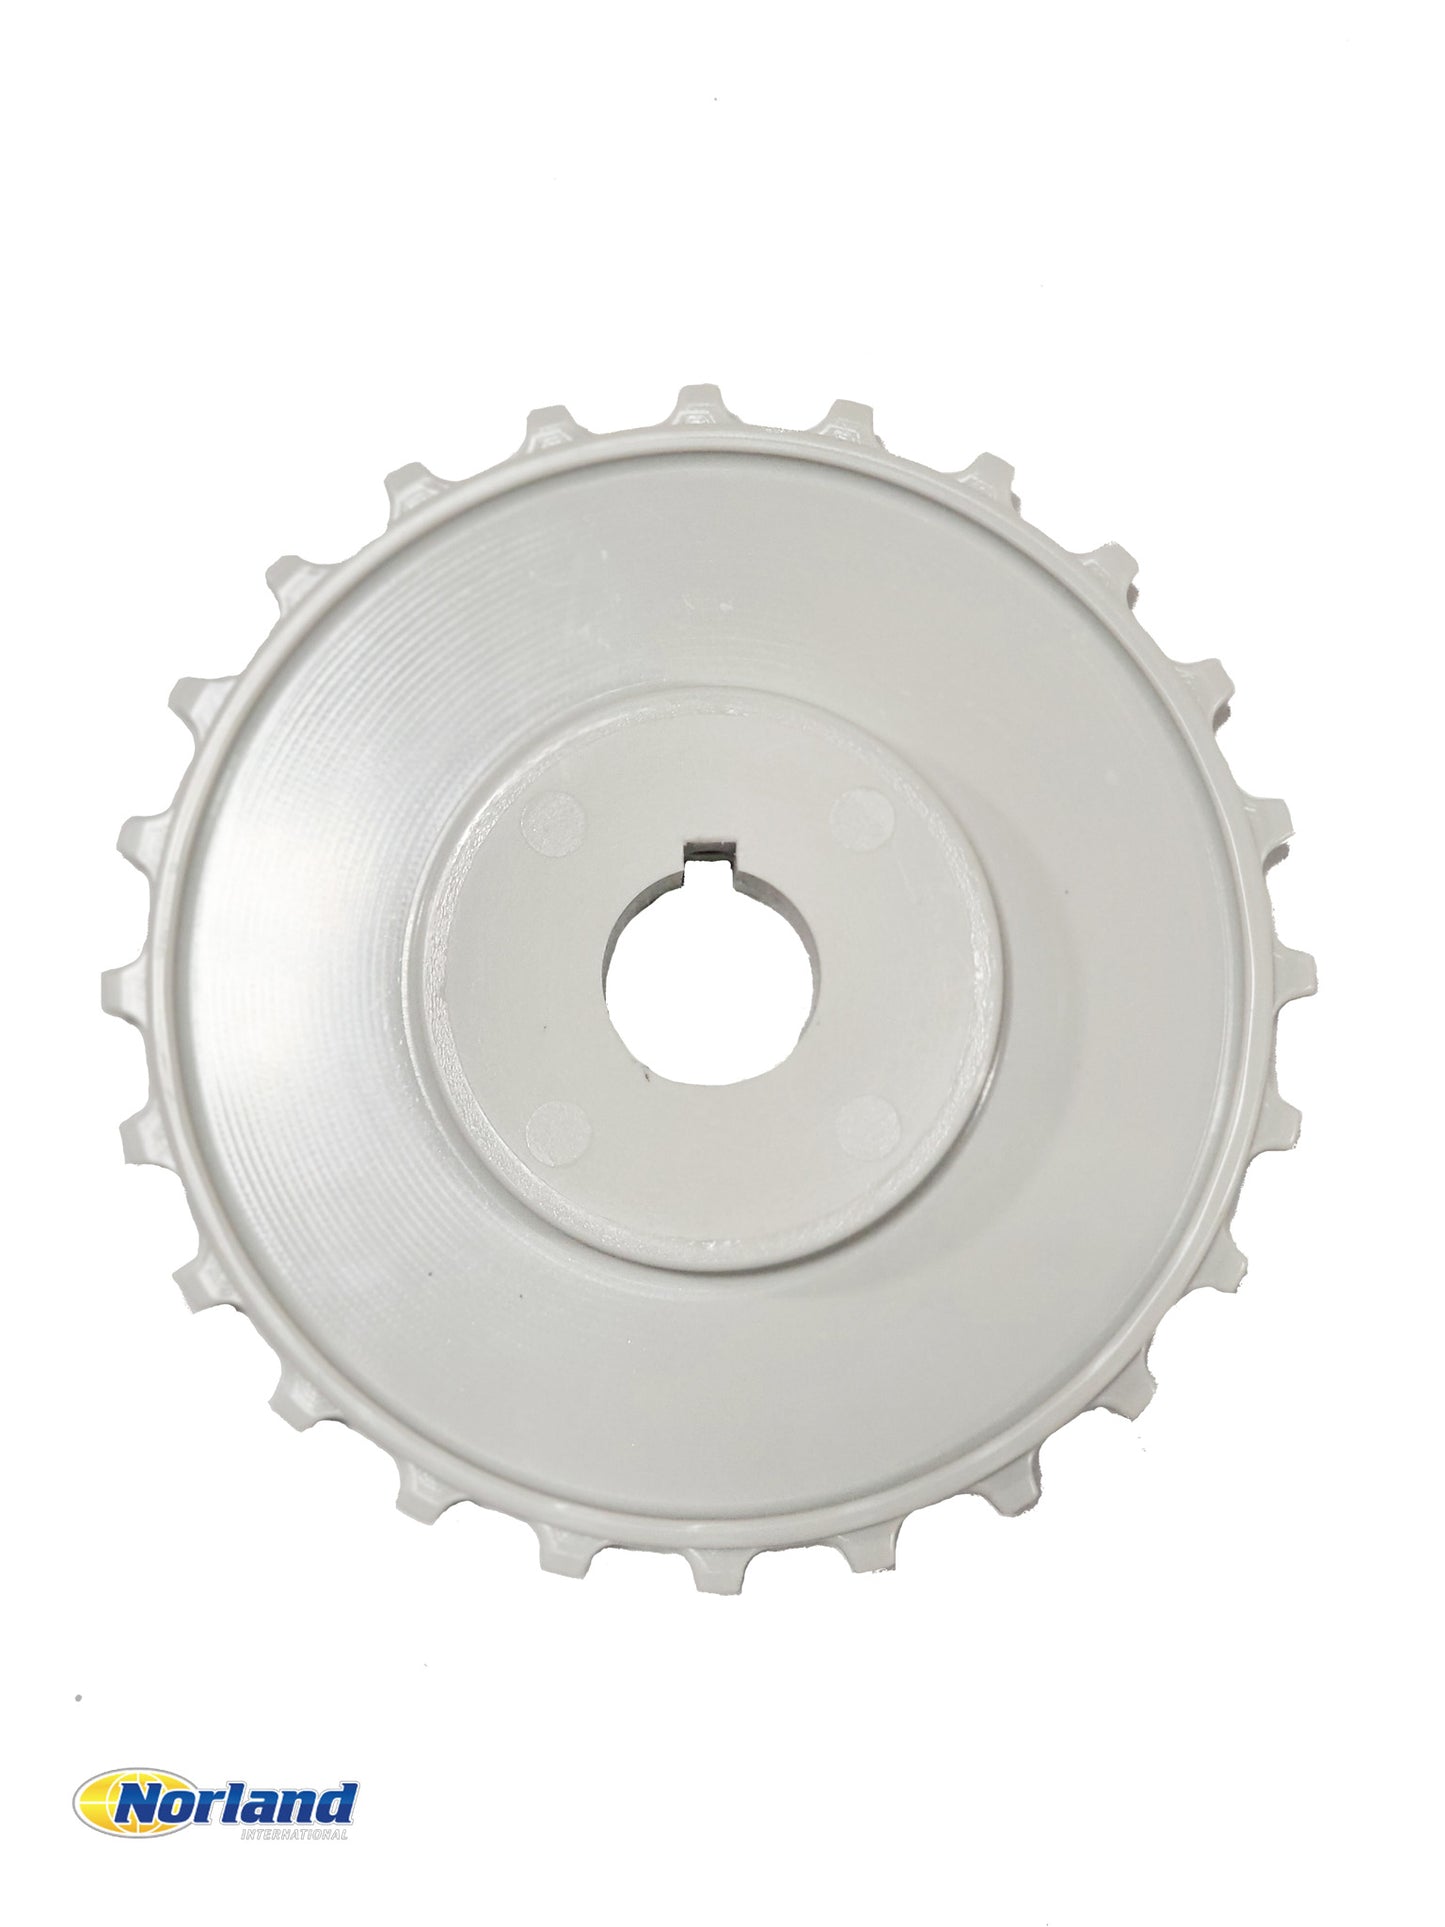 1" BORE, 24 TOOTH, SPROCKET